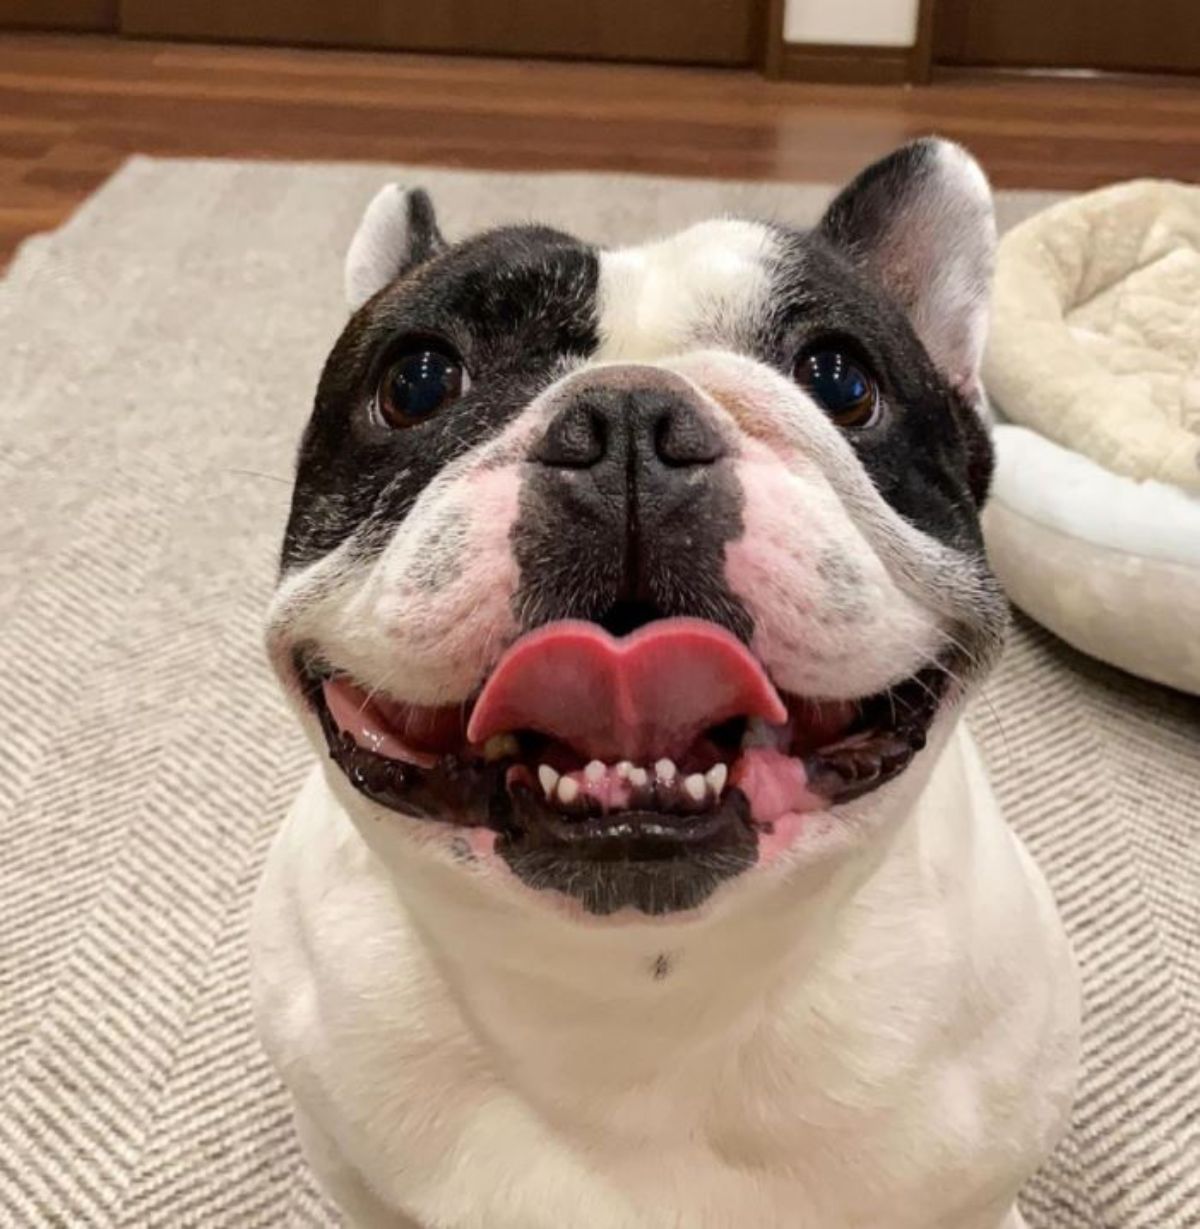 smiling French Bulldog with its tongue sticking out and sitting on the carpet floor